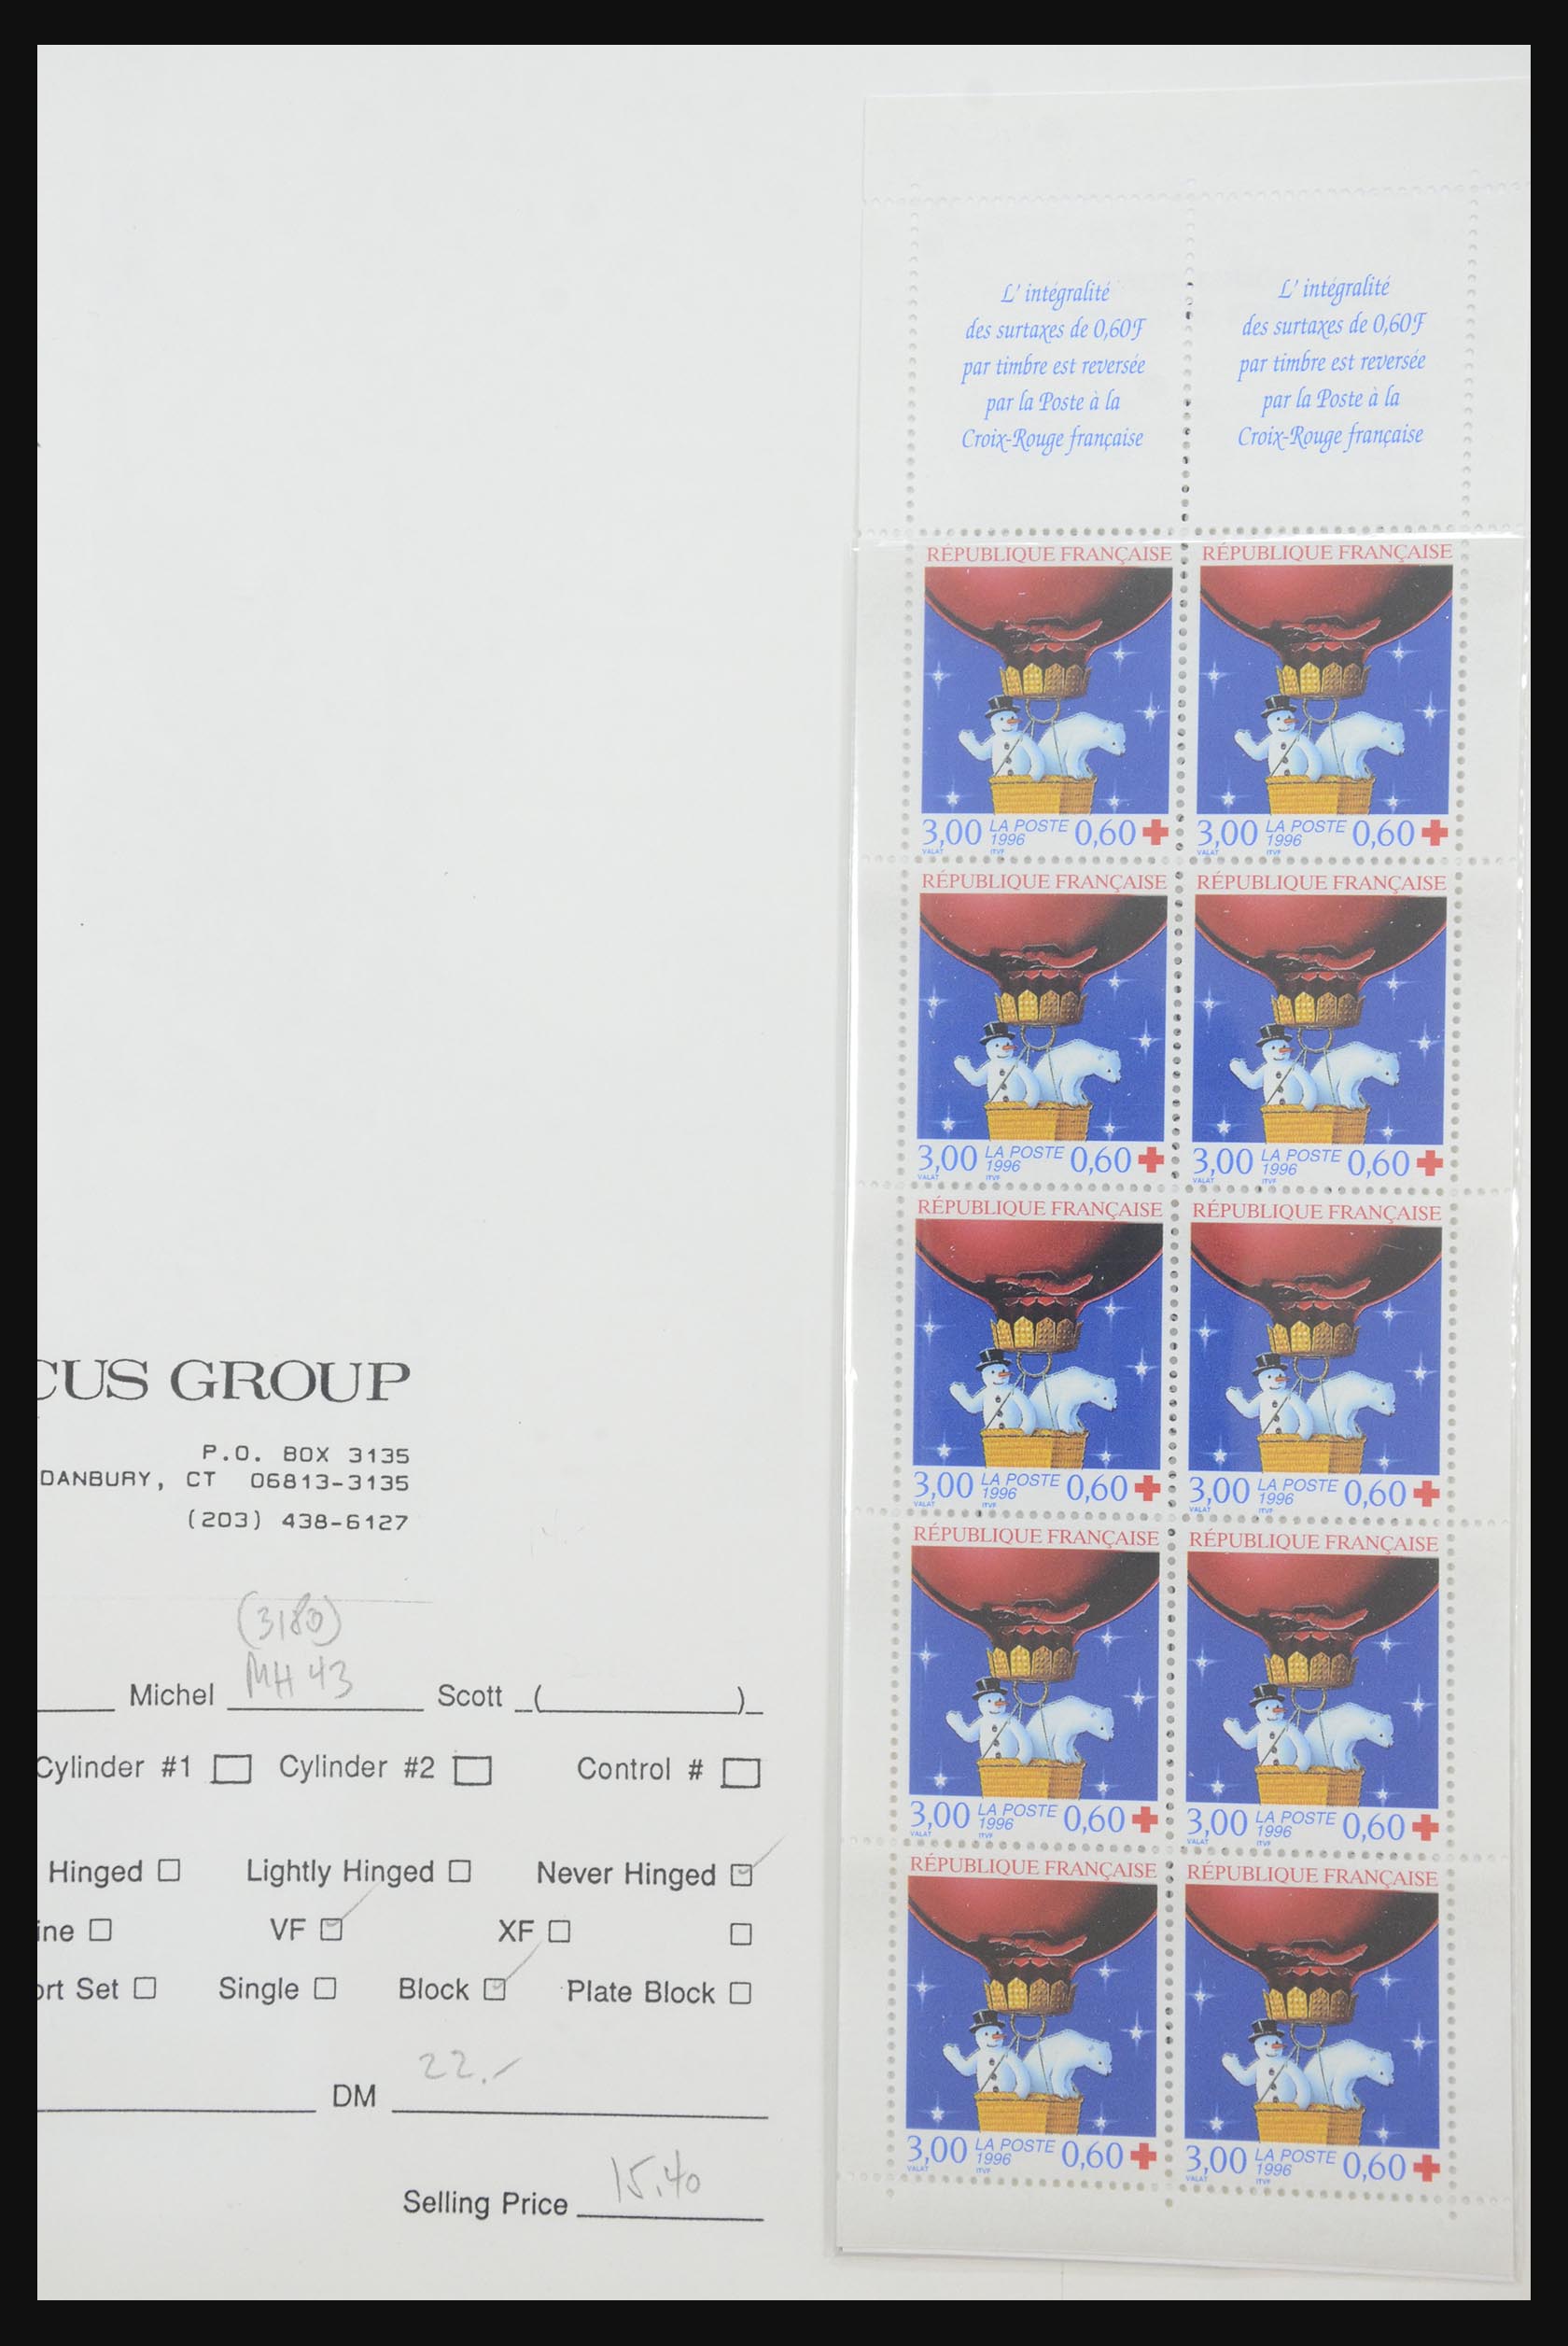 31915 064 - 31915 Western Europe souvenir sheets and stamp booklets on FDC.